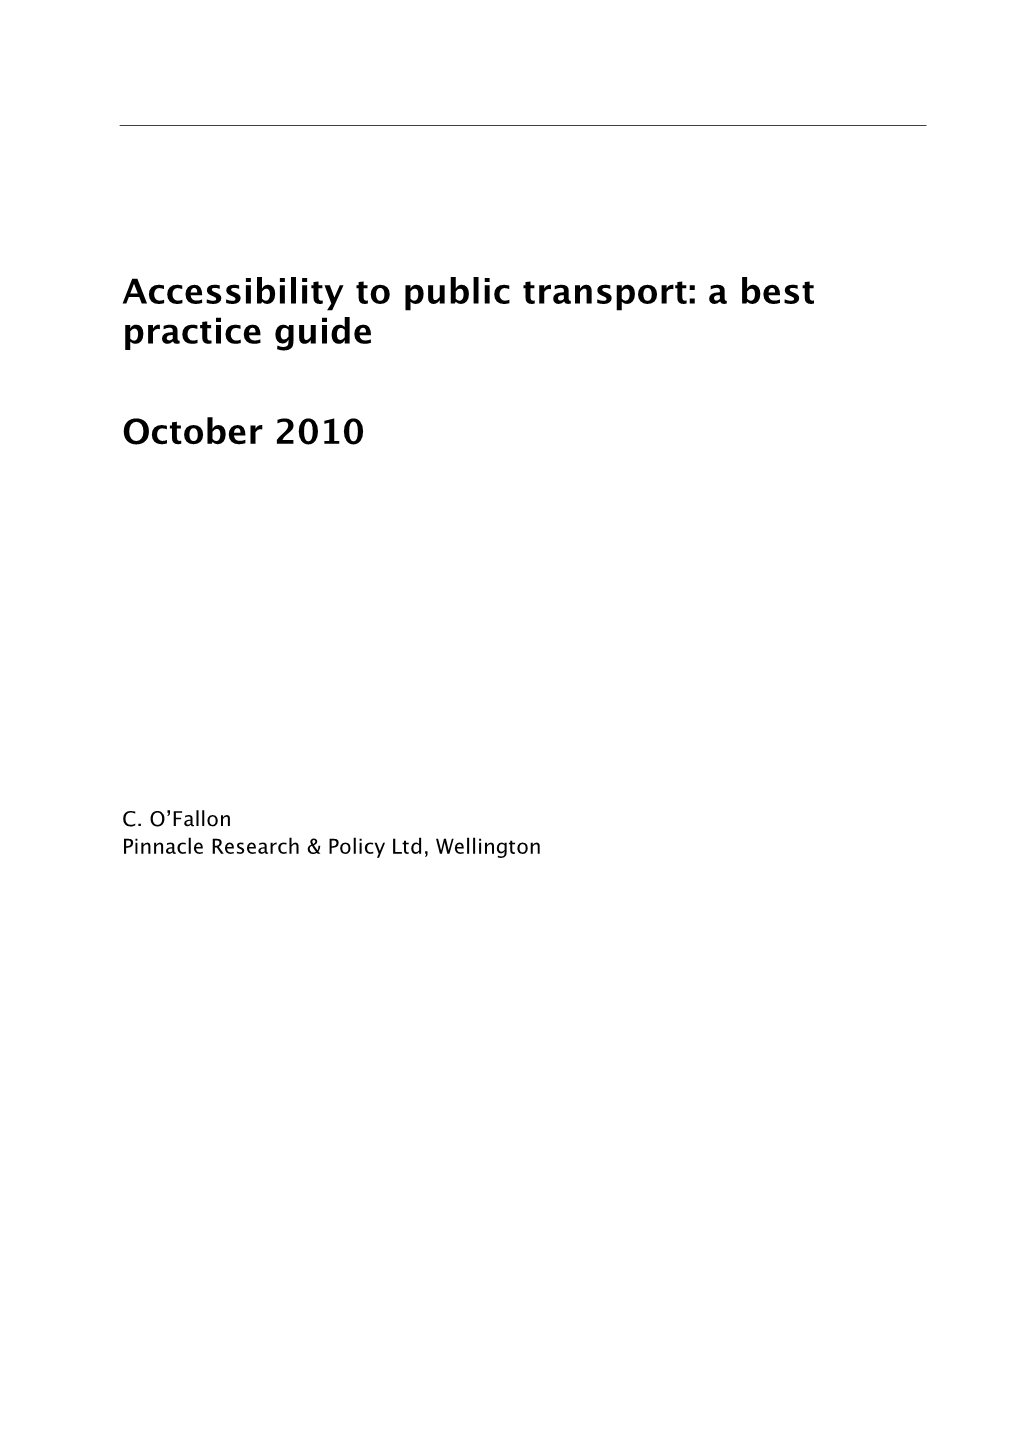 Accessibility to Public Transport: a Best Practice Guide October 2010